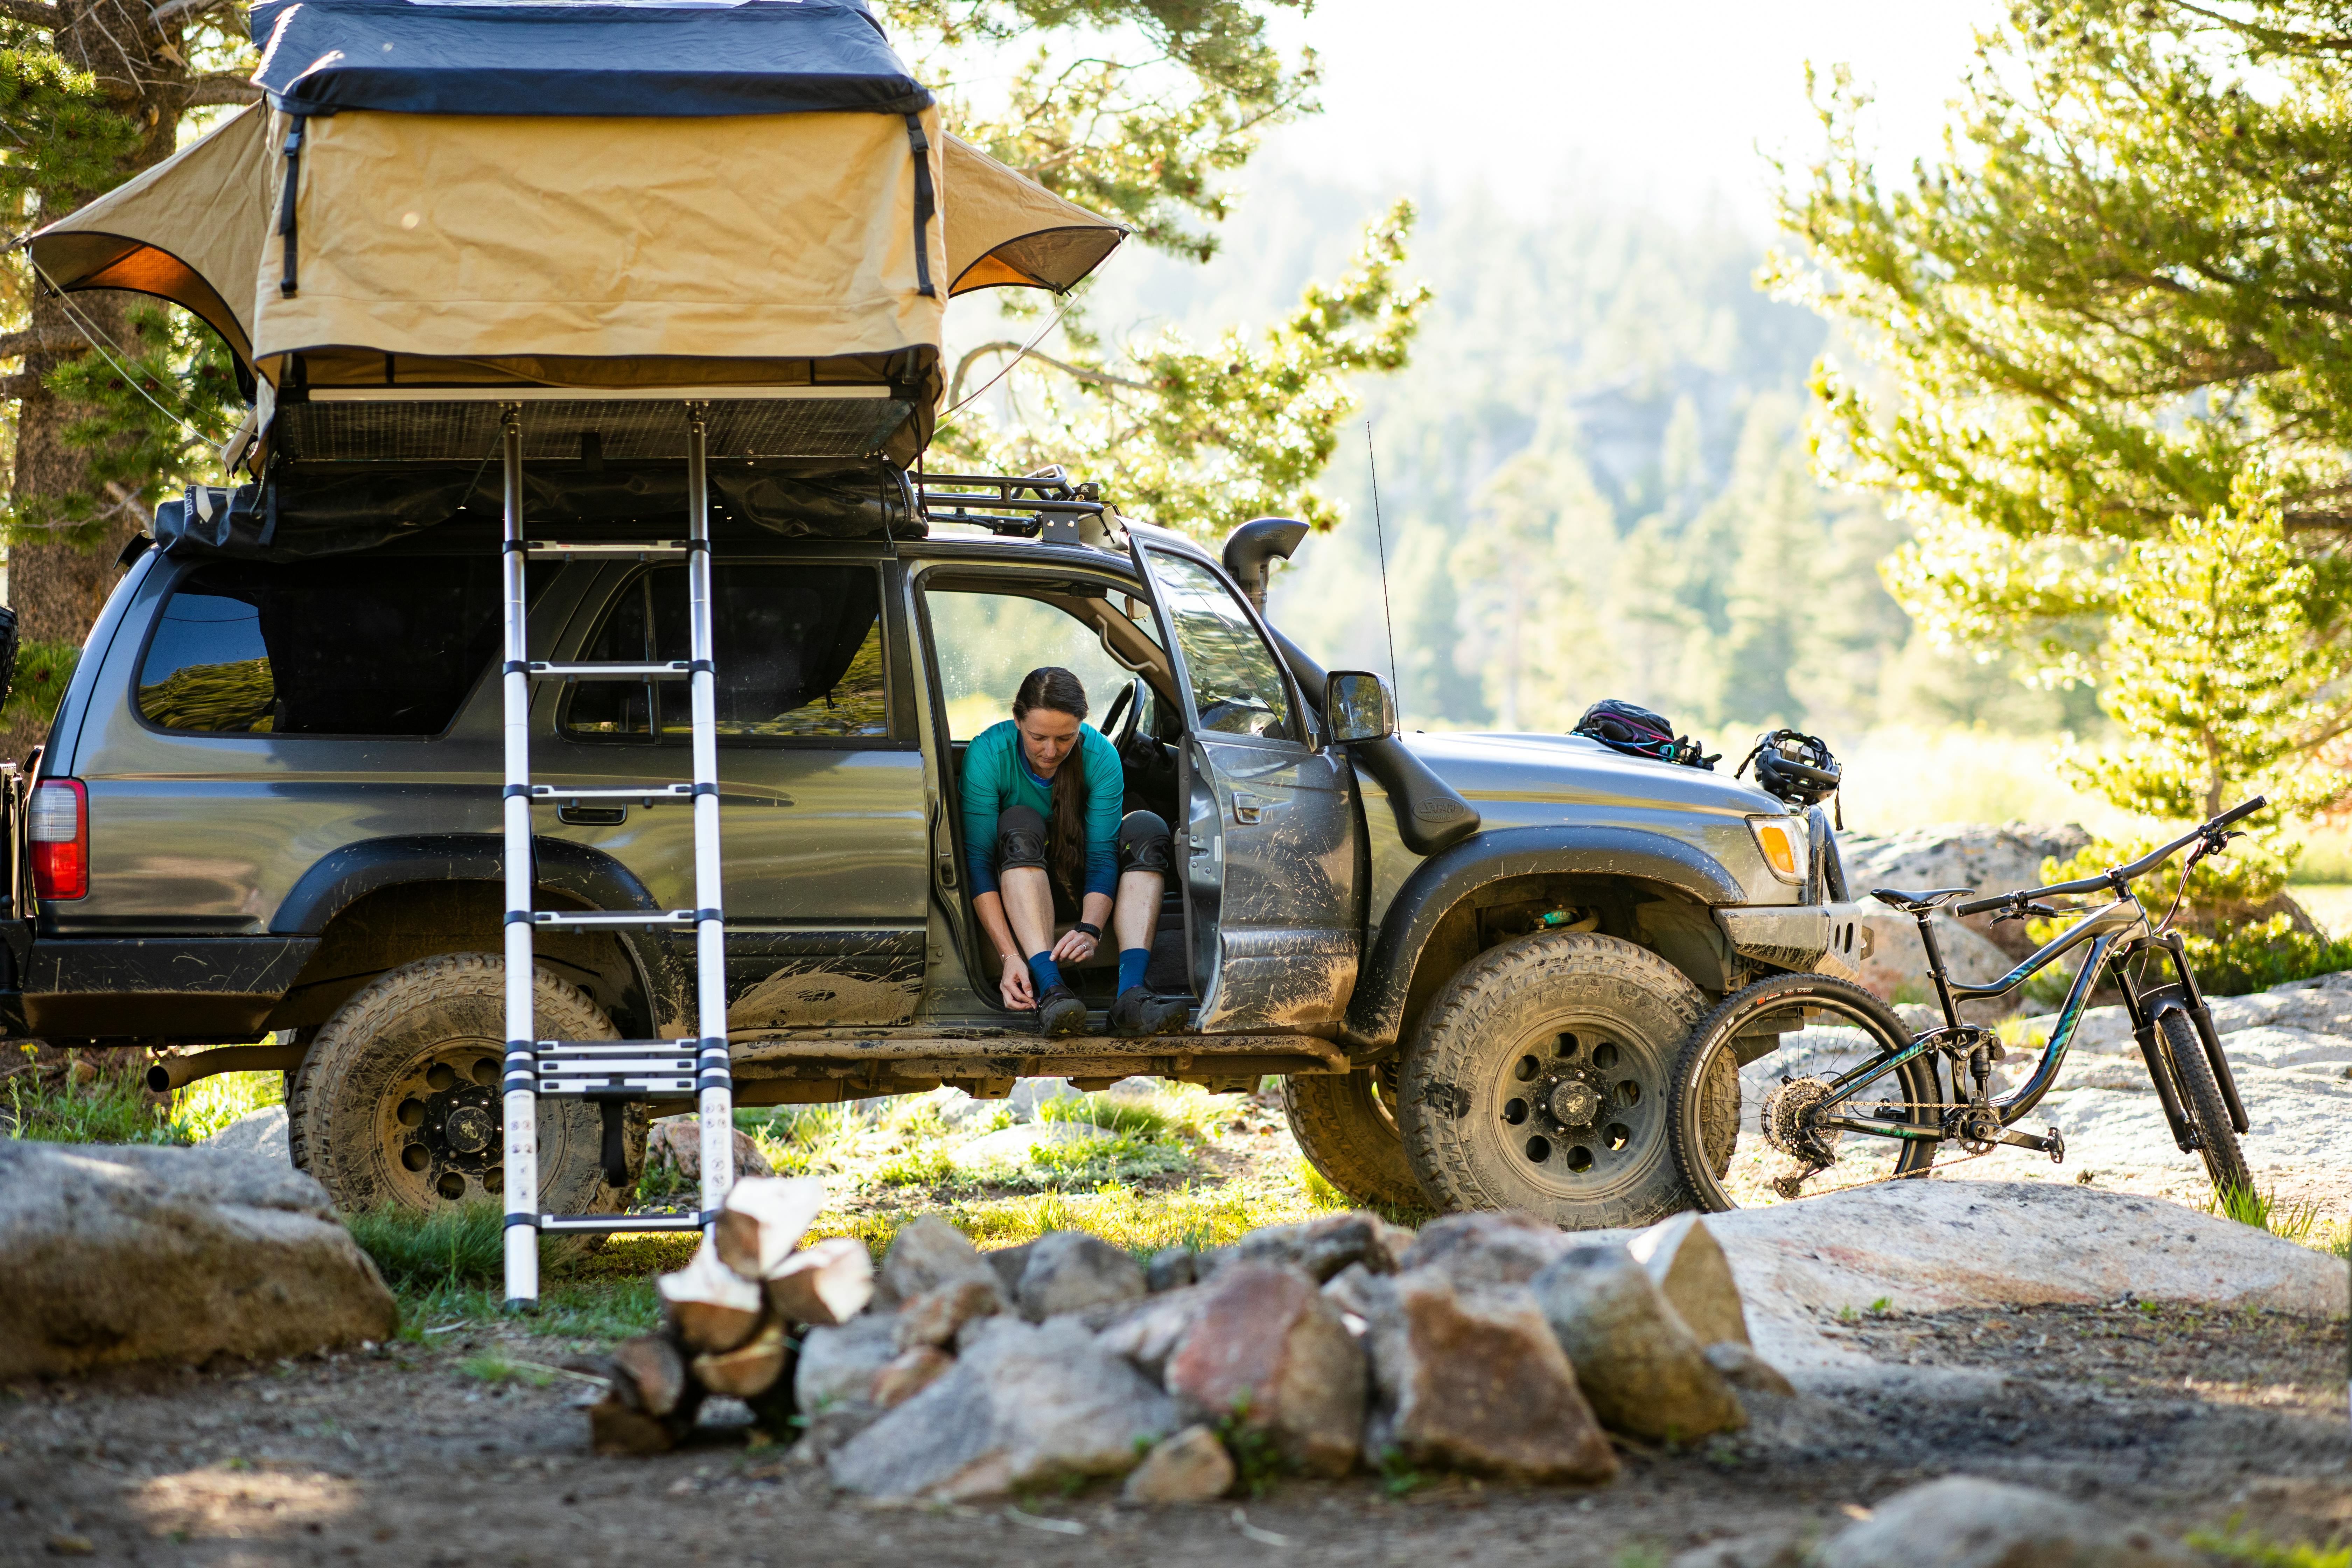 A woman sitting in her jeep putting on her shoes, a tent installed on the roof of the jeep and her mountain bike standing off to the side.